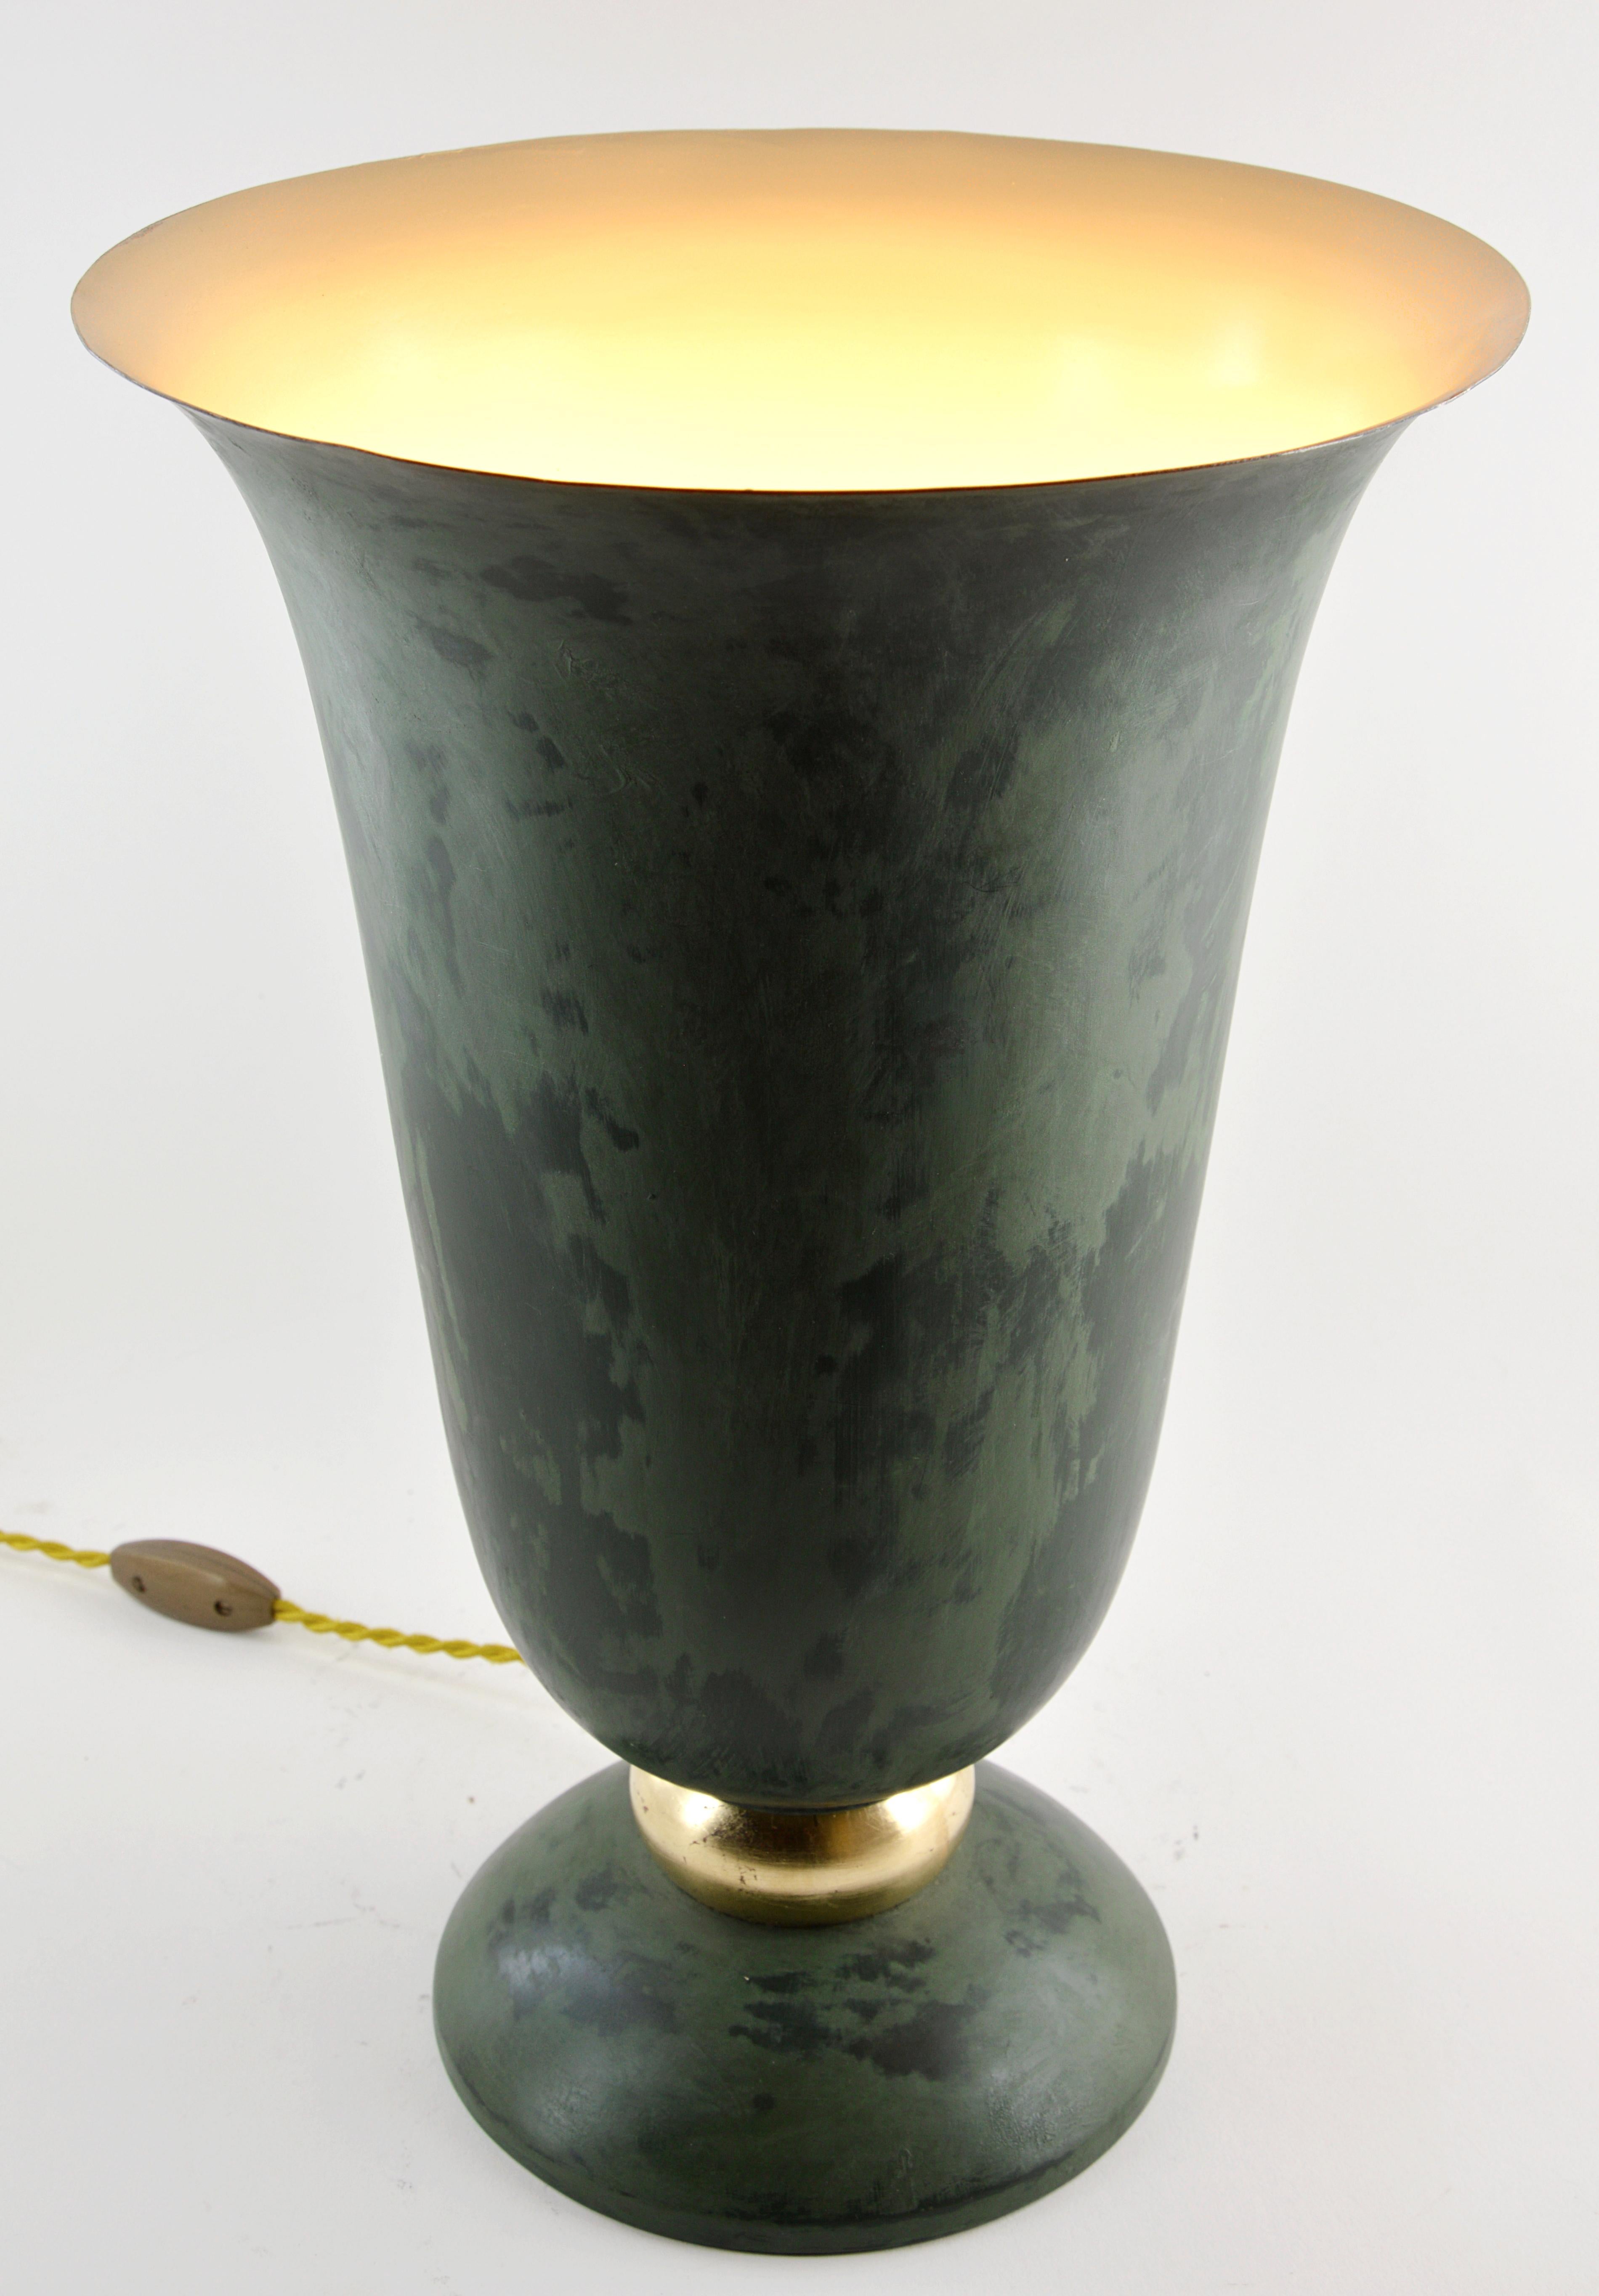 Copper French Art Deco Table Lamp in the Shape of Jean Dunand Lamps, Gold Leaf, 1930 For Sale